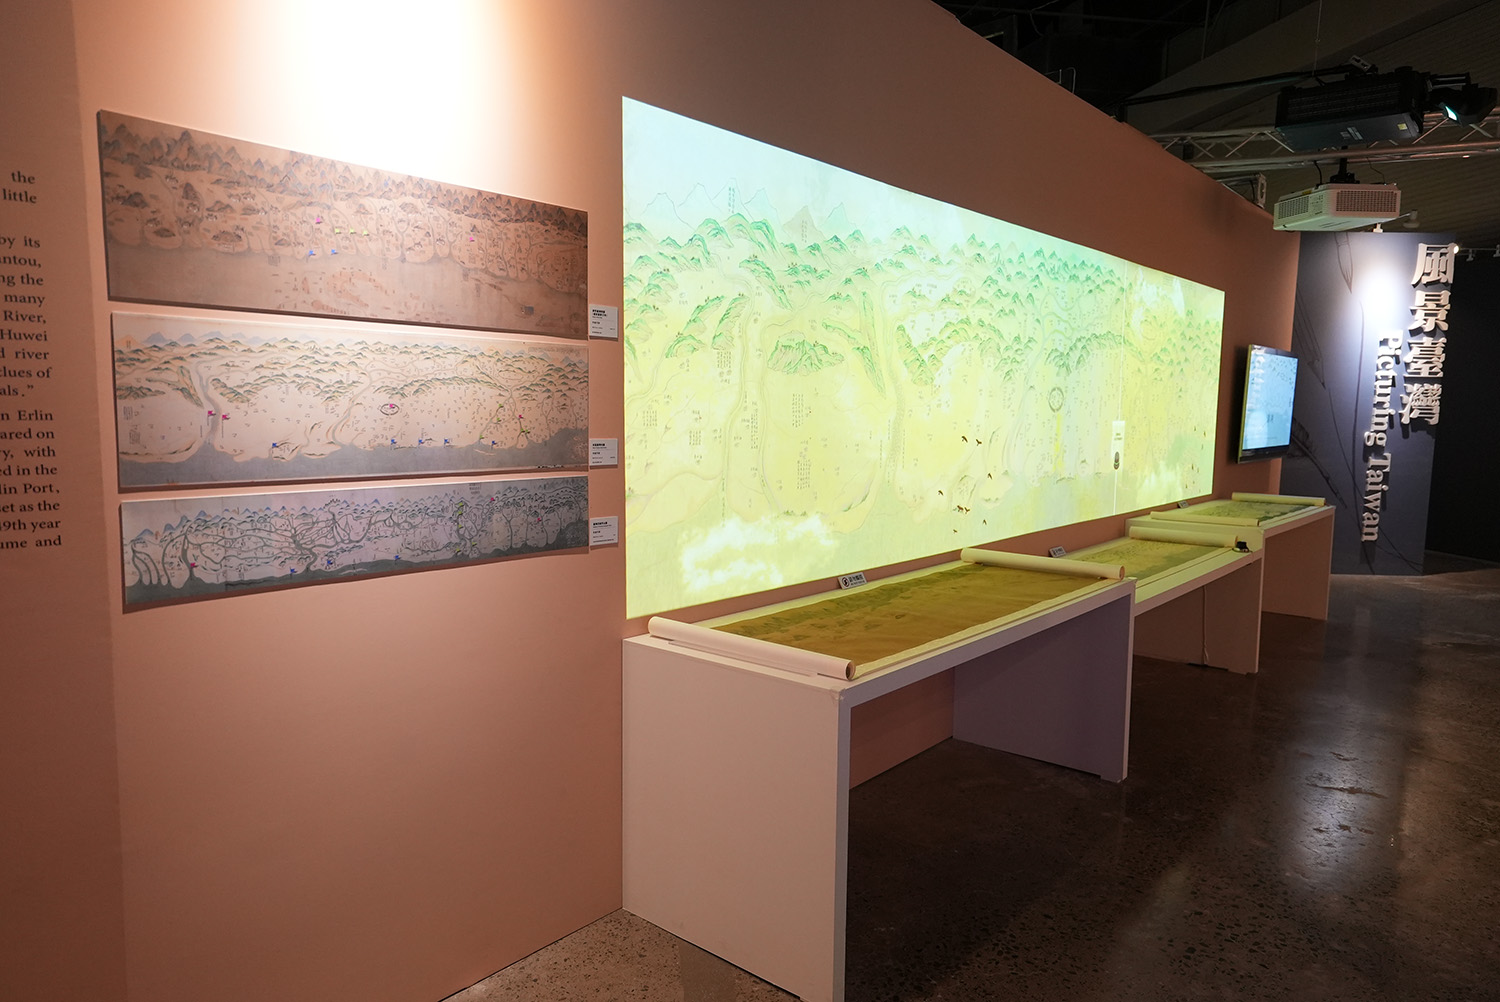 Map of Taiwan, Qing Dynasty Interactive Installation